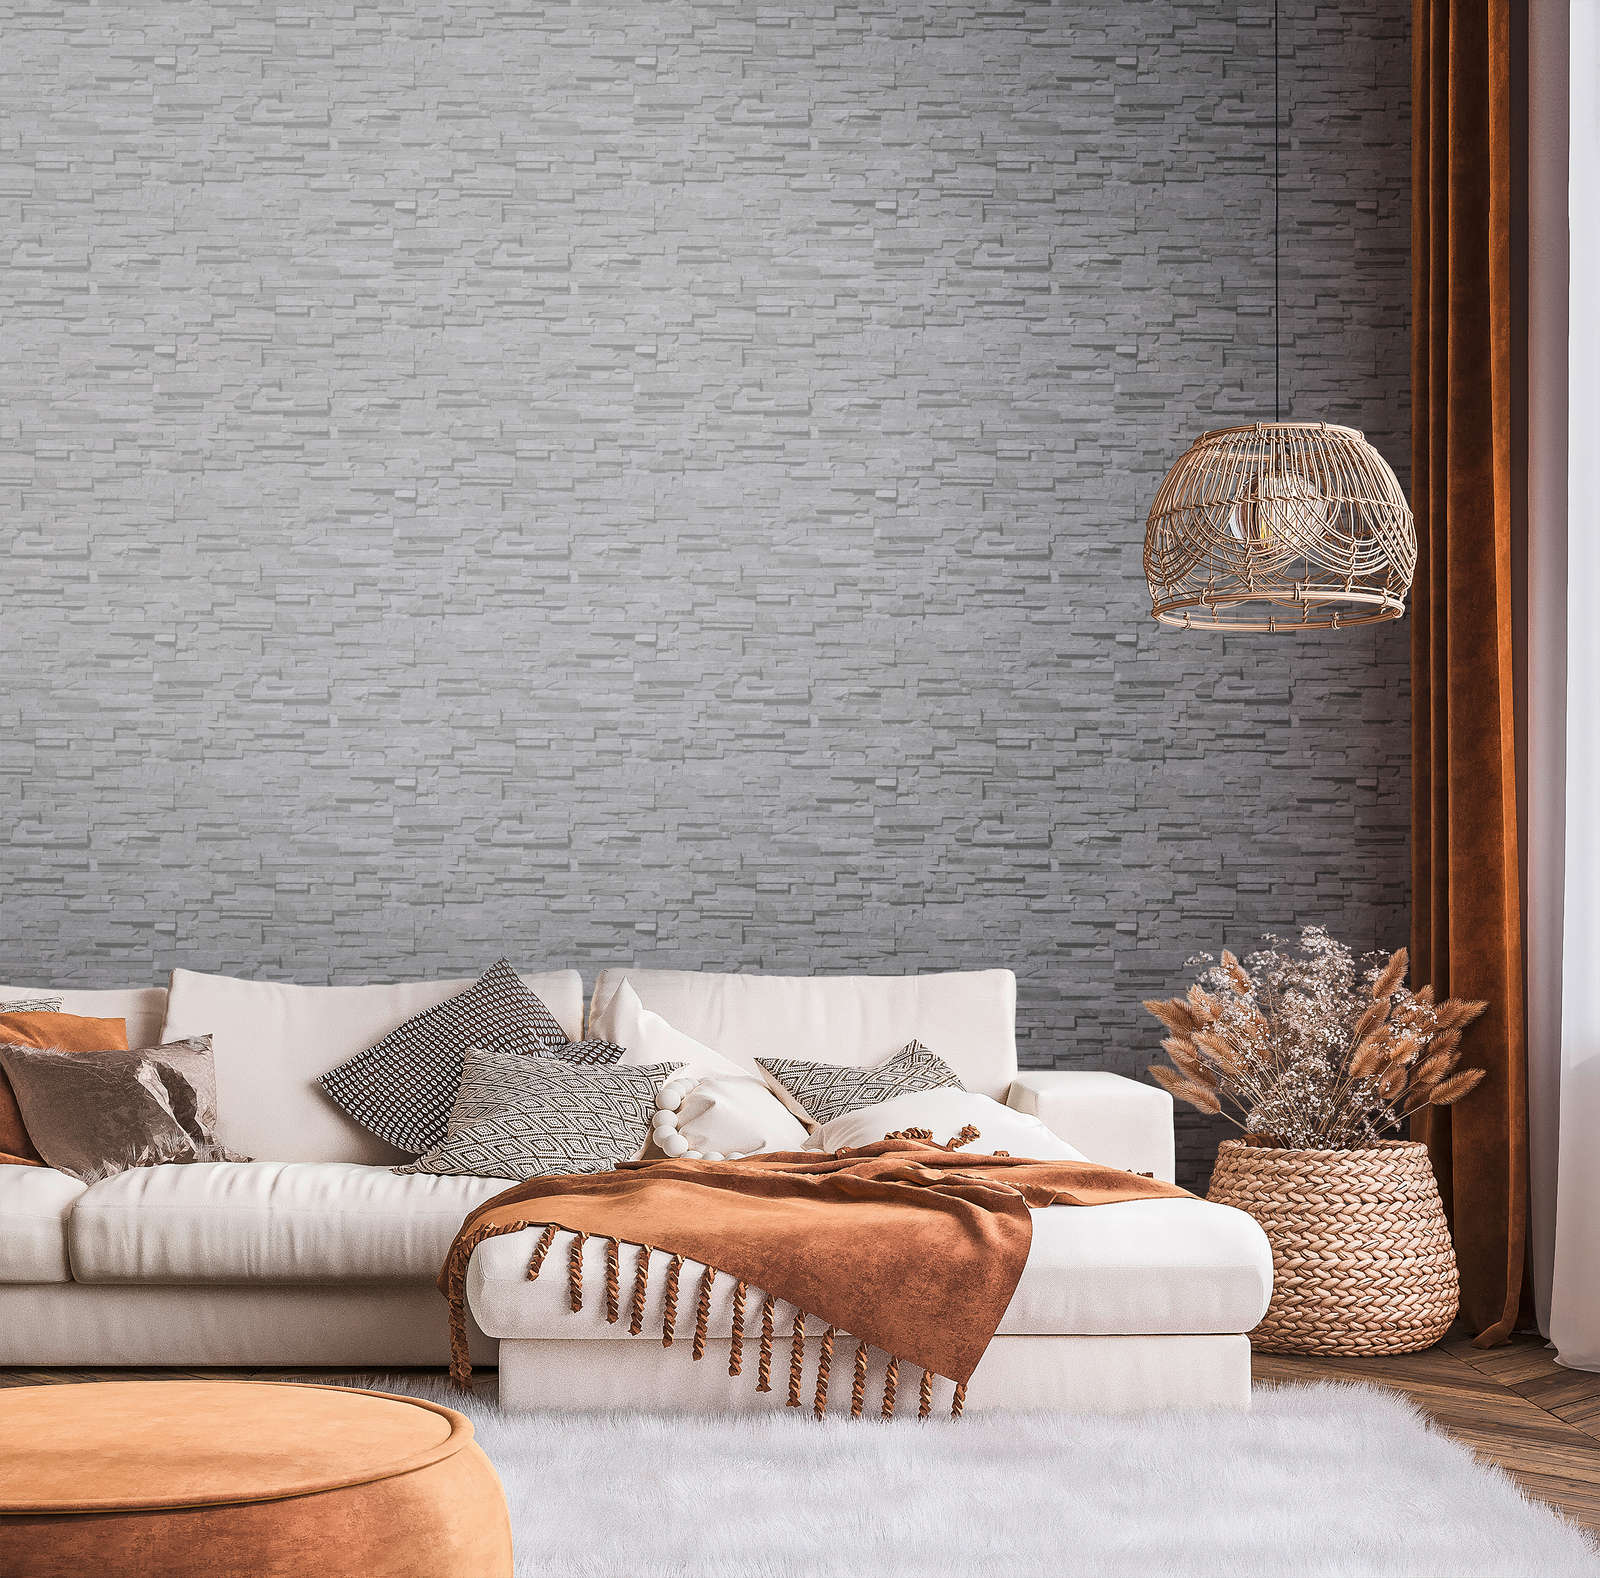             Non-woven wallpaper with stone look & gloss effect - grey
        